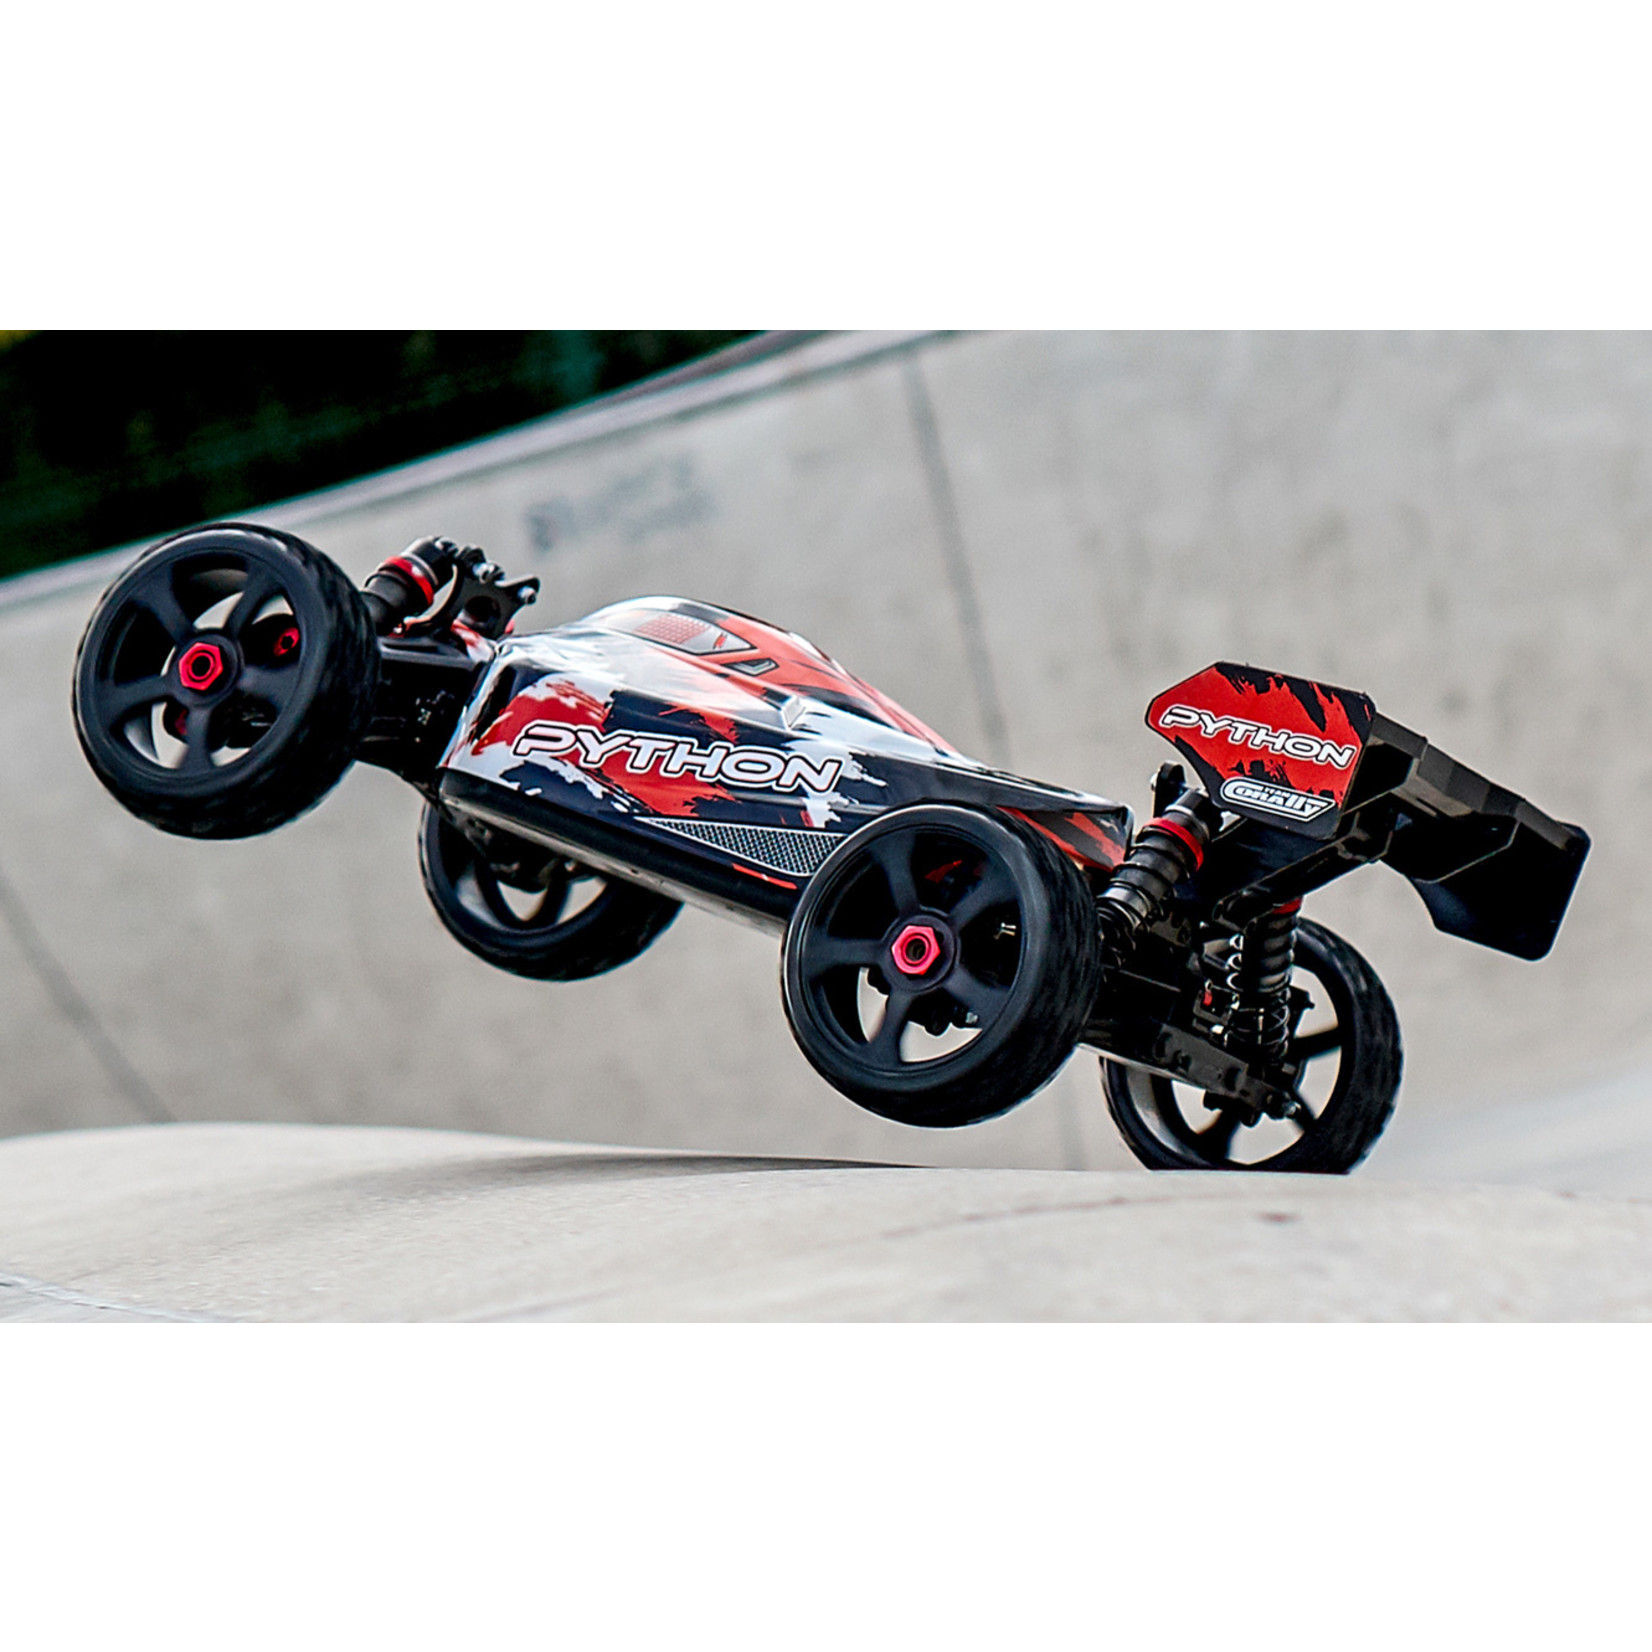 Corally (Team Corally) COR00182 1/8 Python XP 2021 4WD 6S Brushless RTR Buggy (No Battery or Charger)